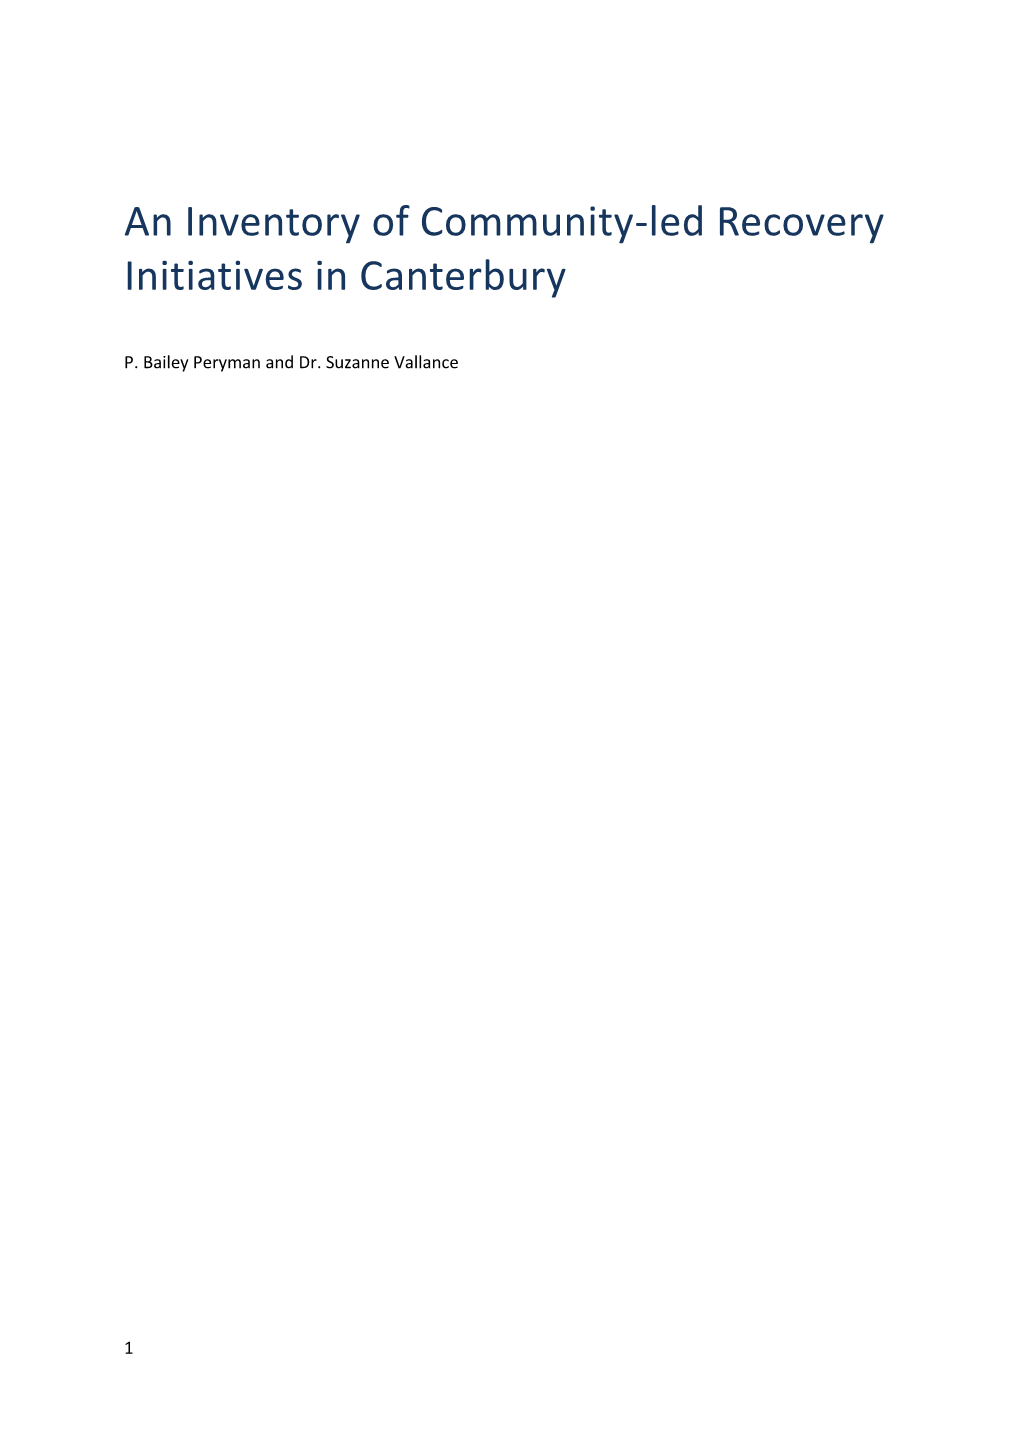 An Inventory of Community-Led Recovery Initiatives in Canterbury